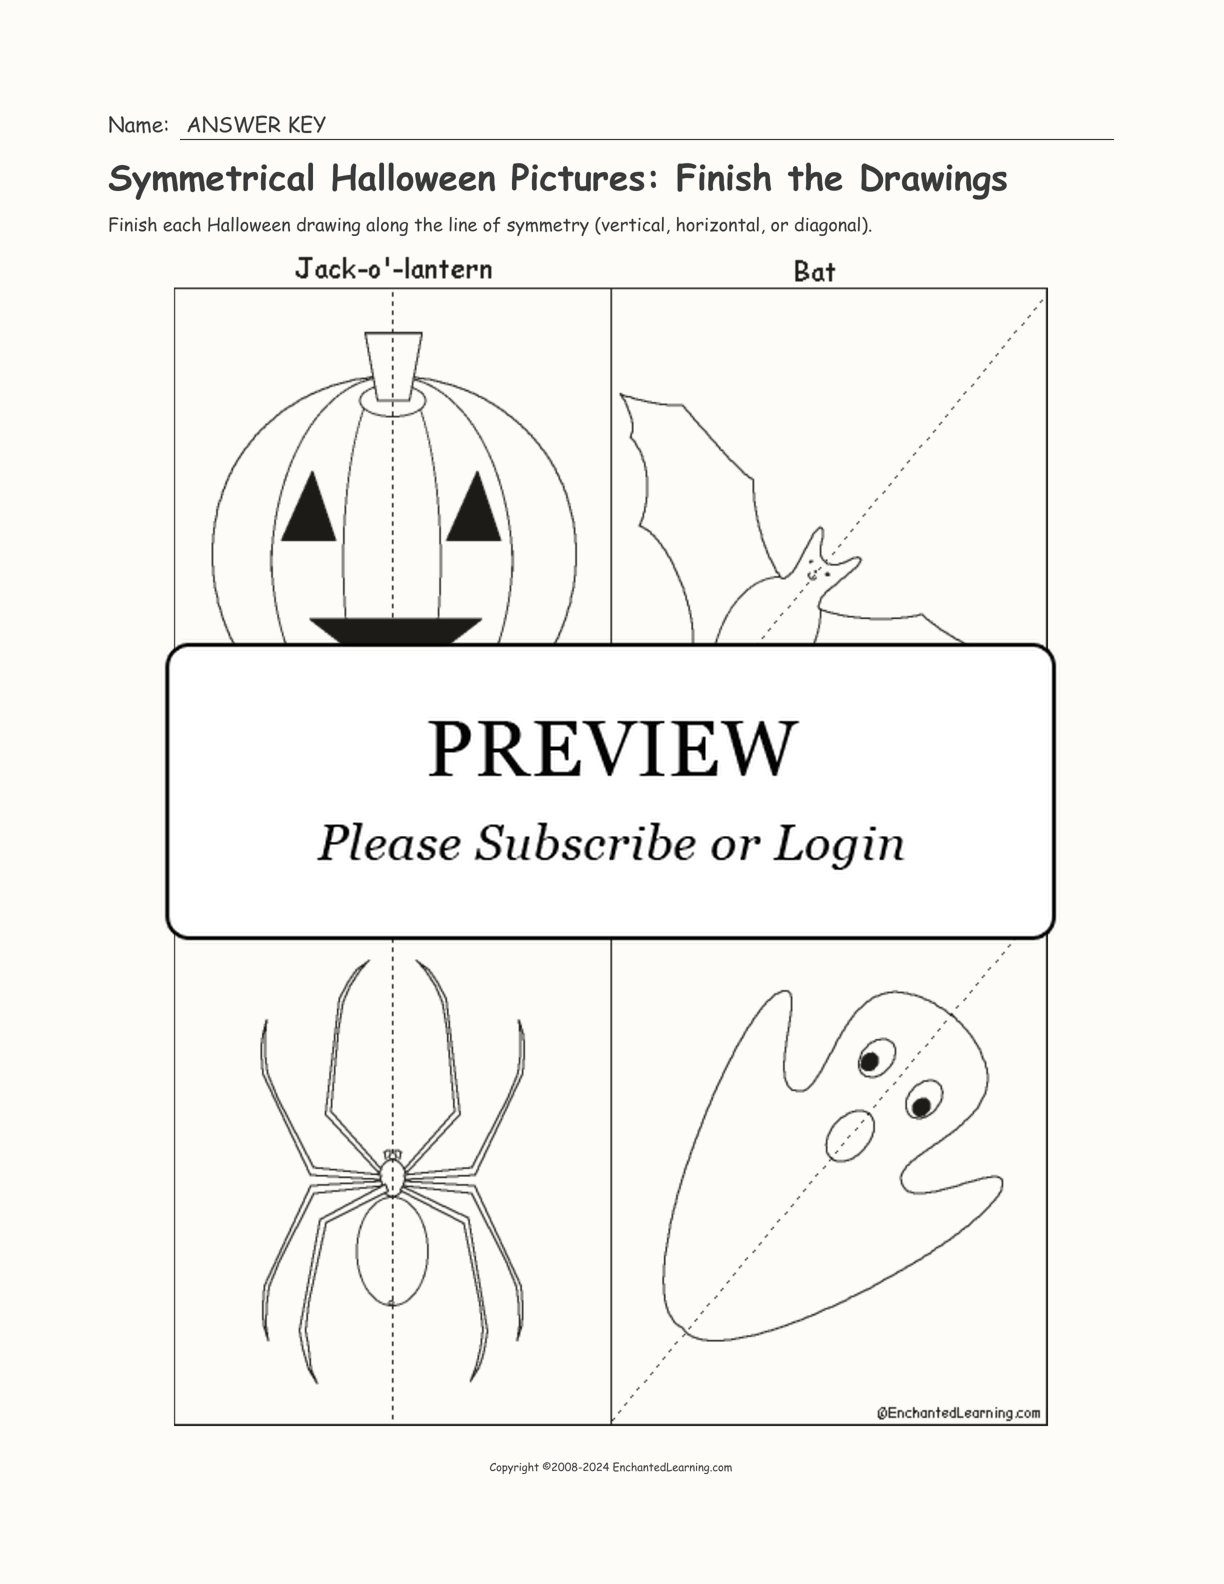 Symmetrical Halloween Pictures: Finish the Drawings interactive worksheet page 2